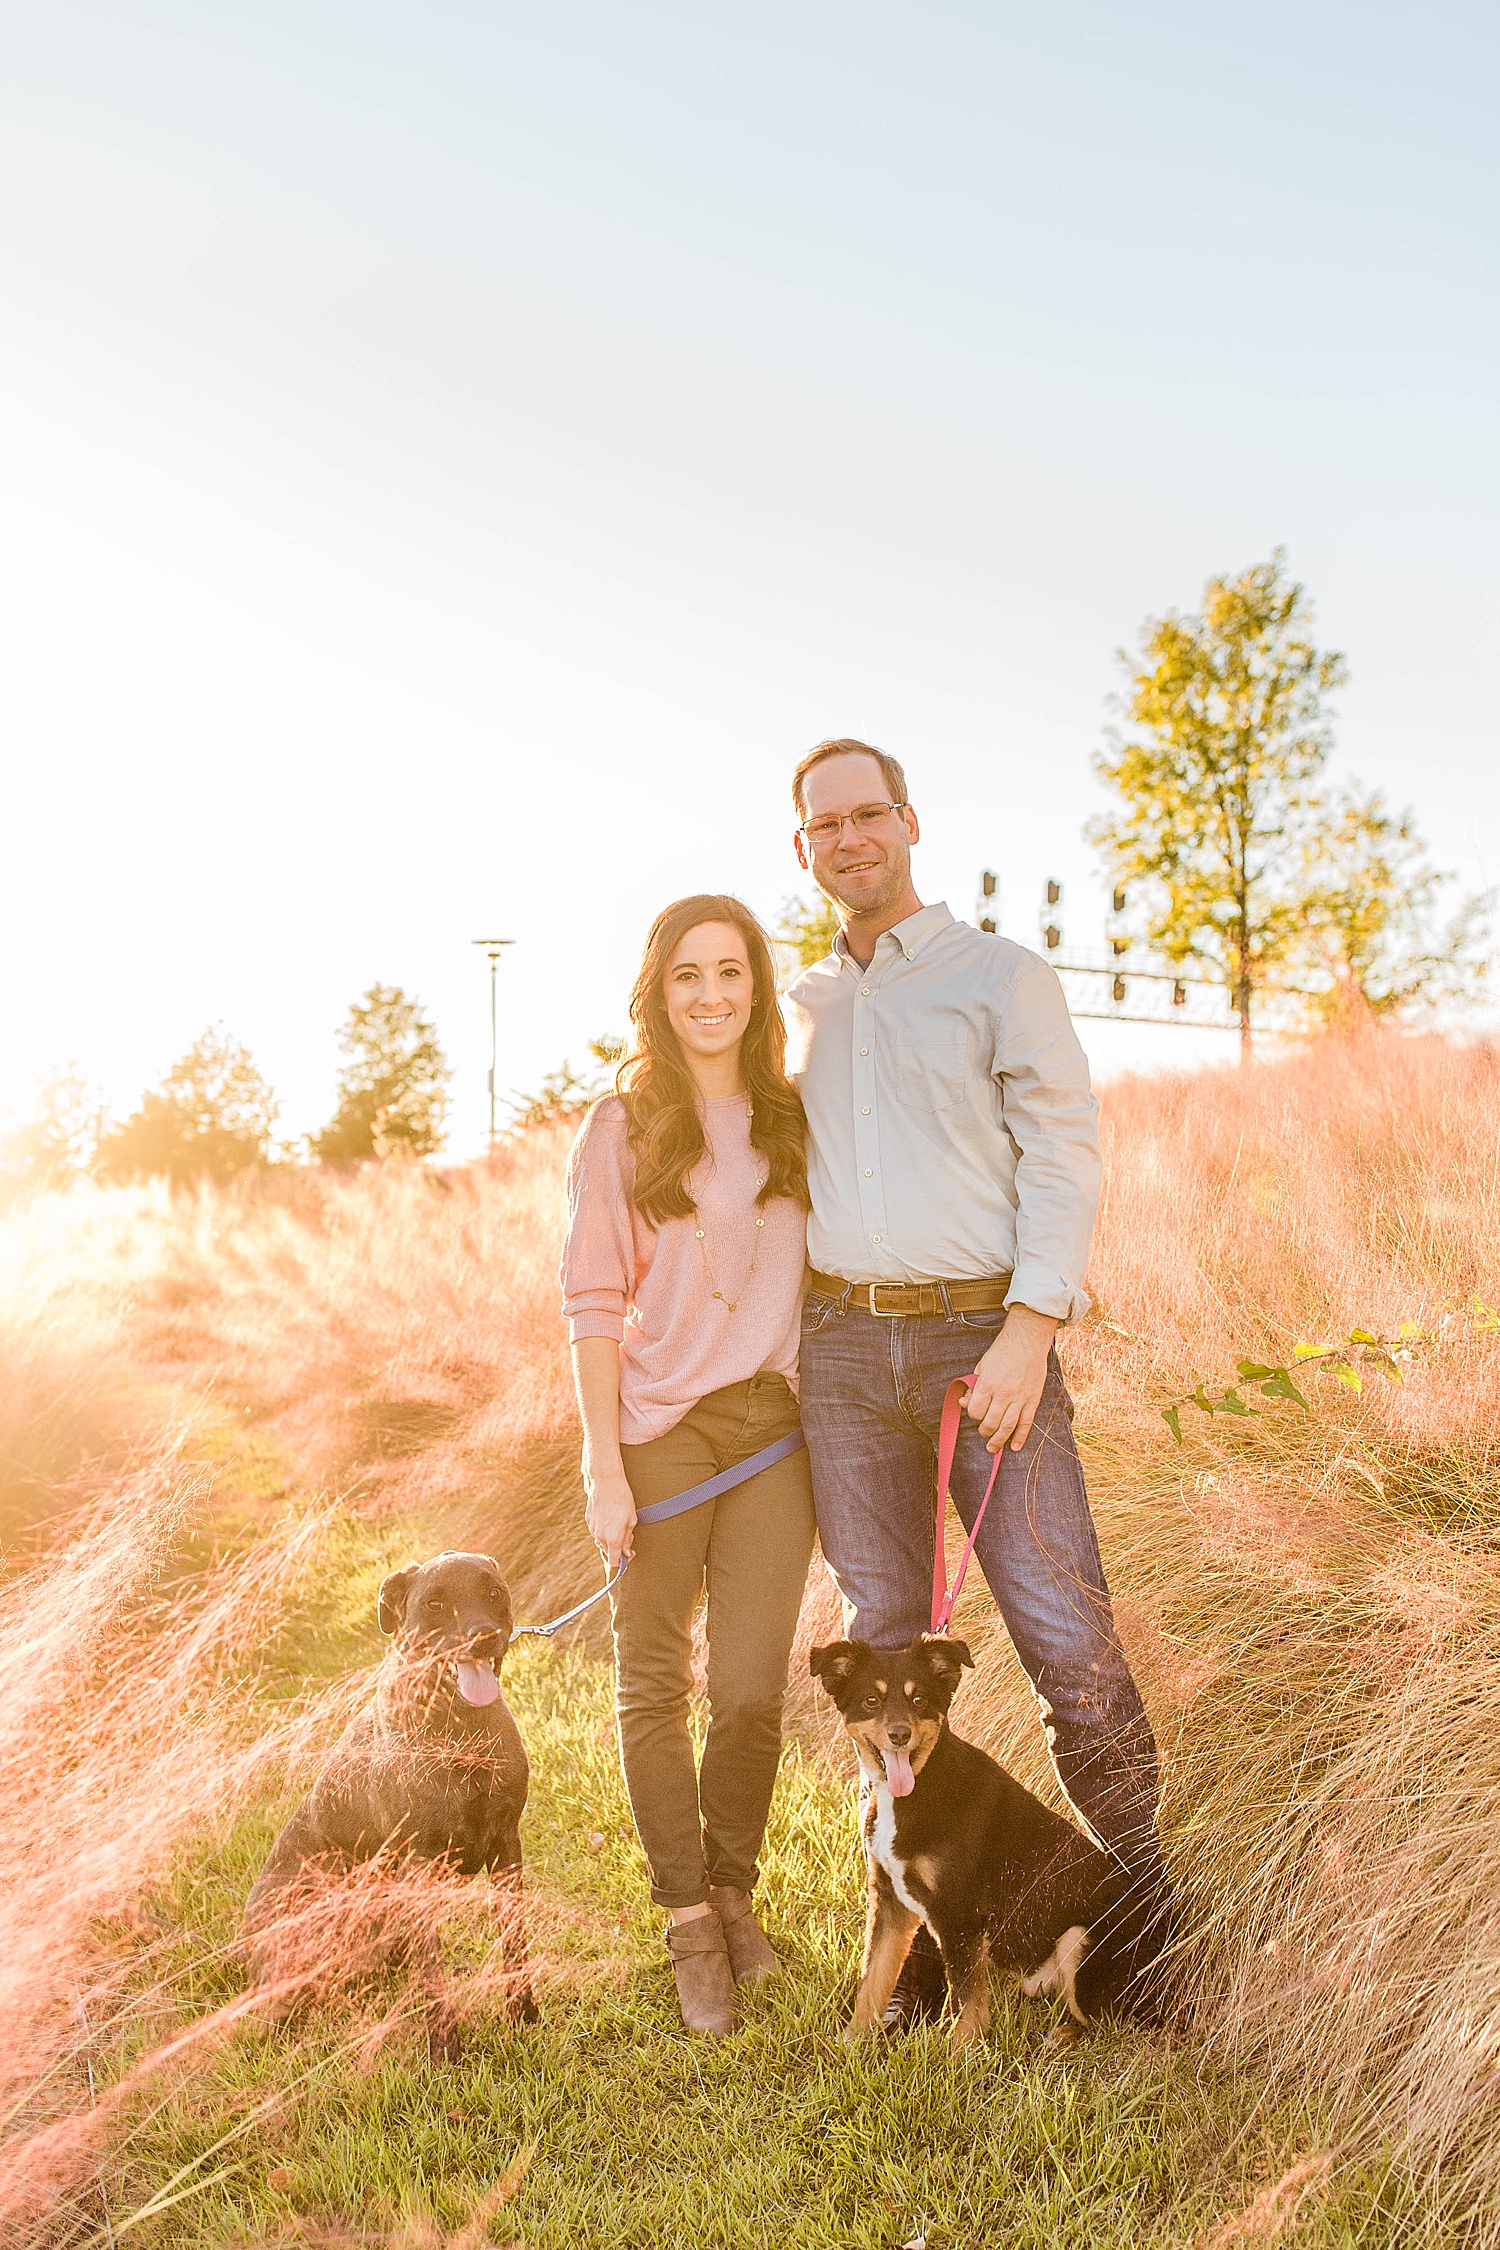 Downtown Birmingham Alabama Engagement Session at Railroad park with their dogs